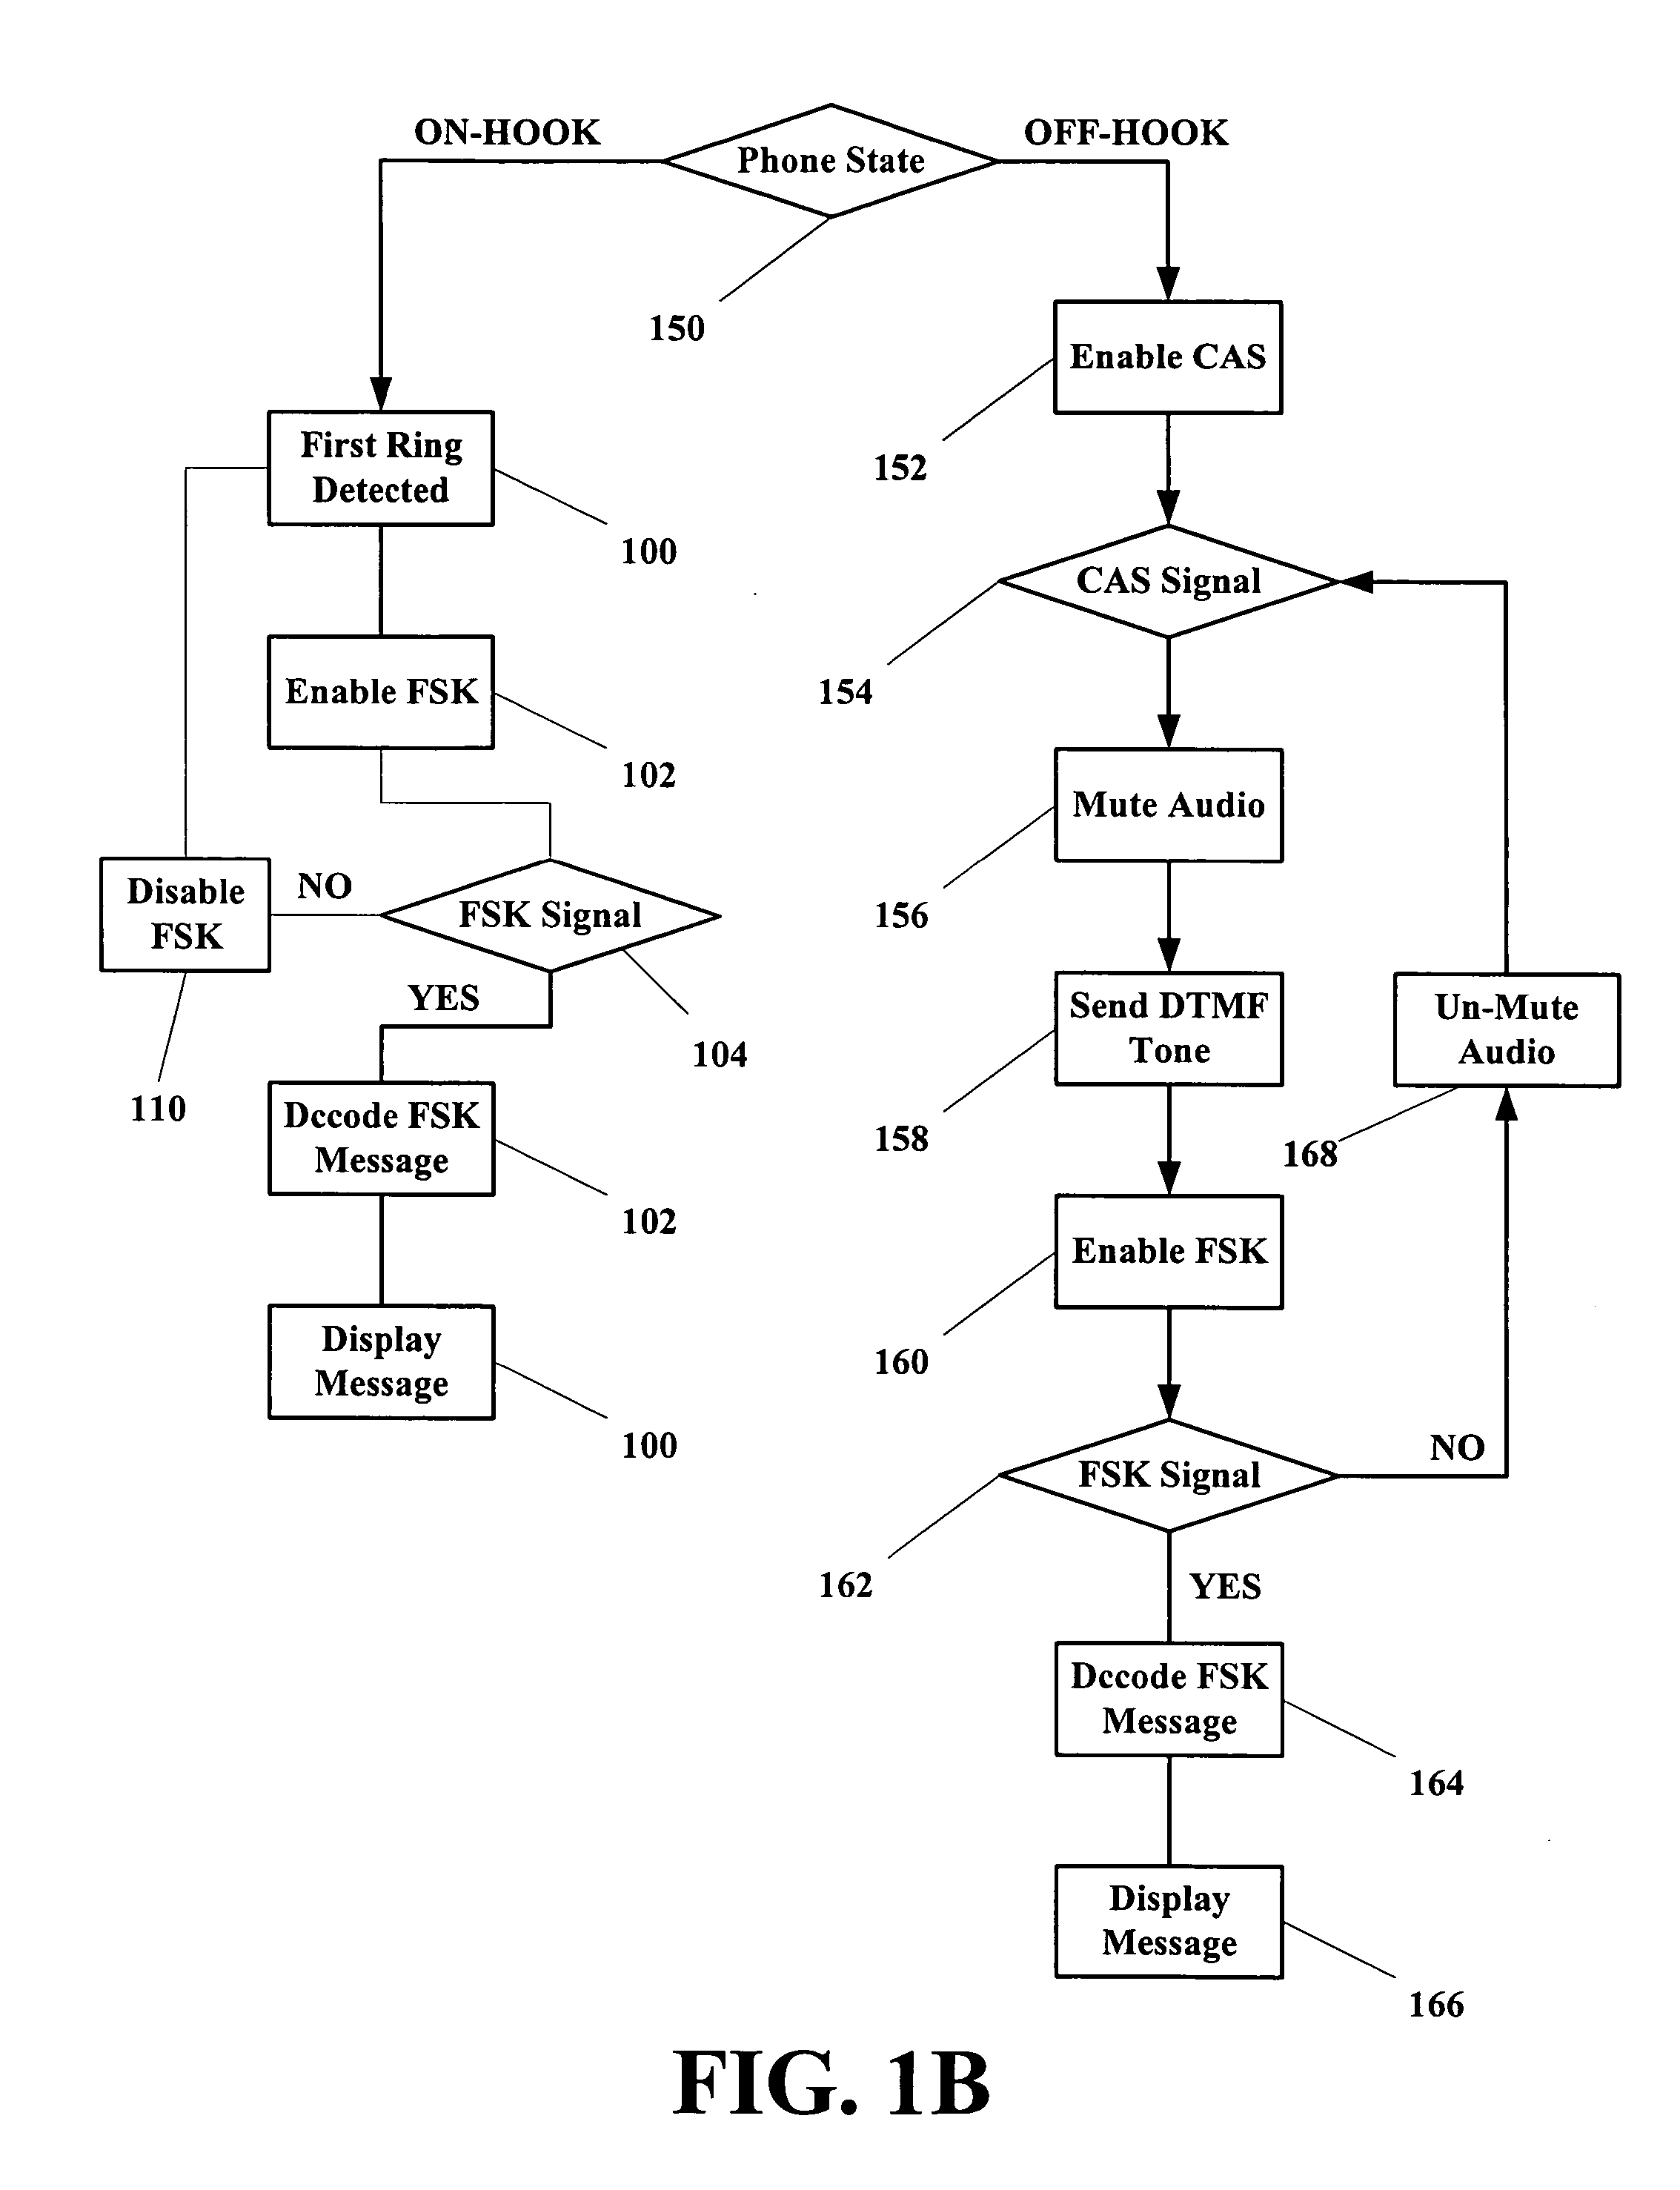 System for transmitting emergency and notification messages over a phone line